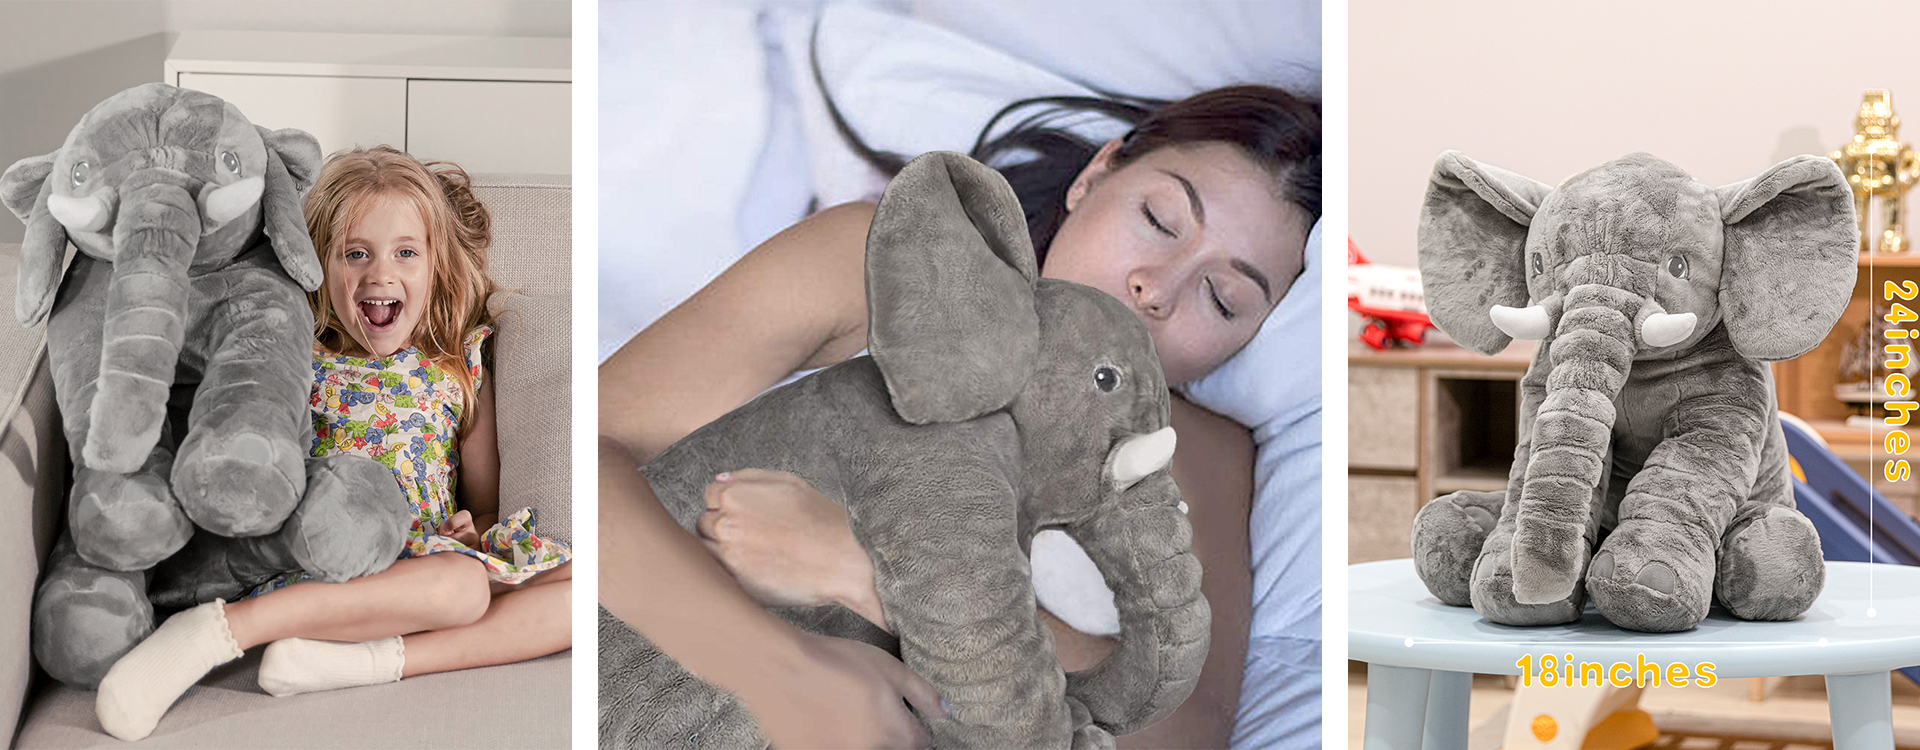 give your friend and kids a elephant plush toy